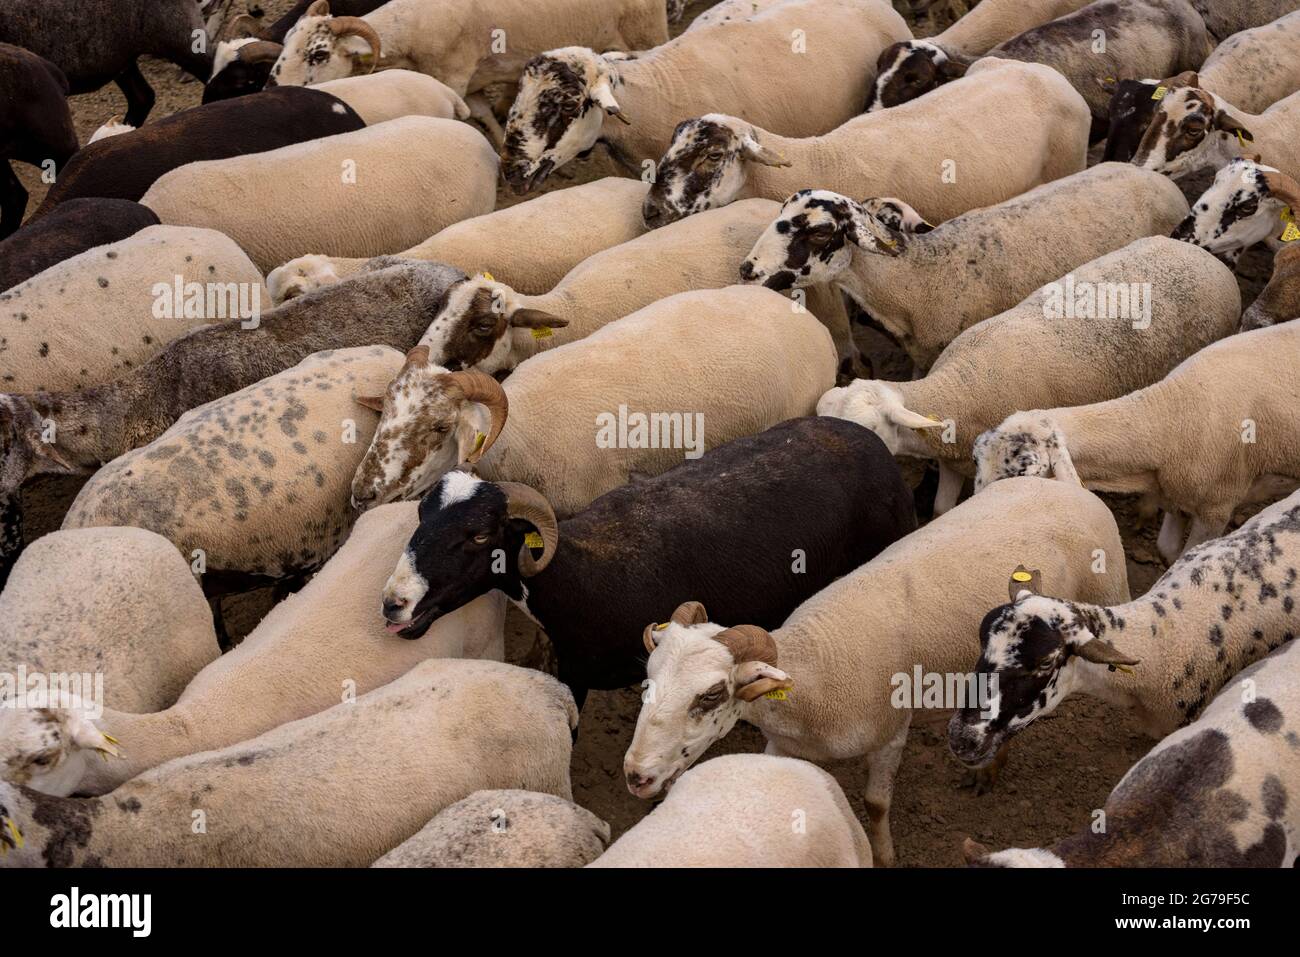 A shepherd and his flock of sheep during the transhumance between inland Catalonia and the Pyrenees (Lluçanès, Osona, Barcelona, Catalonia, Spain) Stock Photo